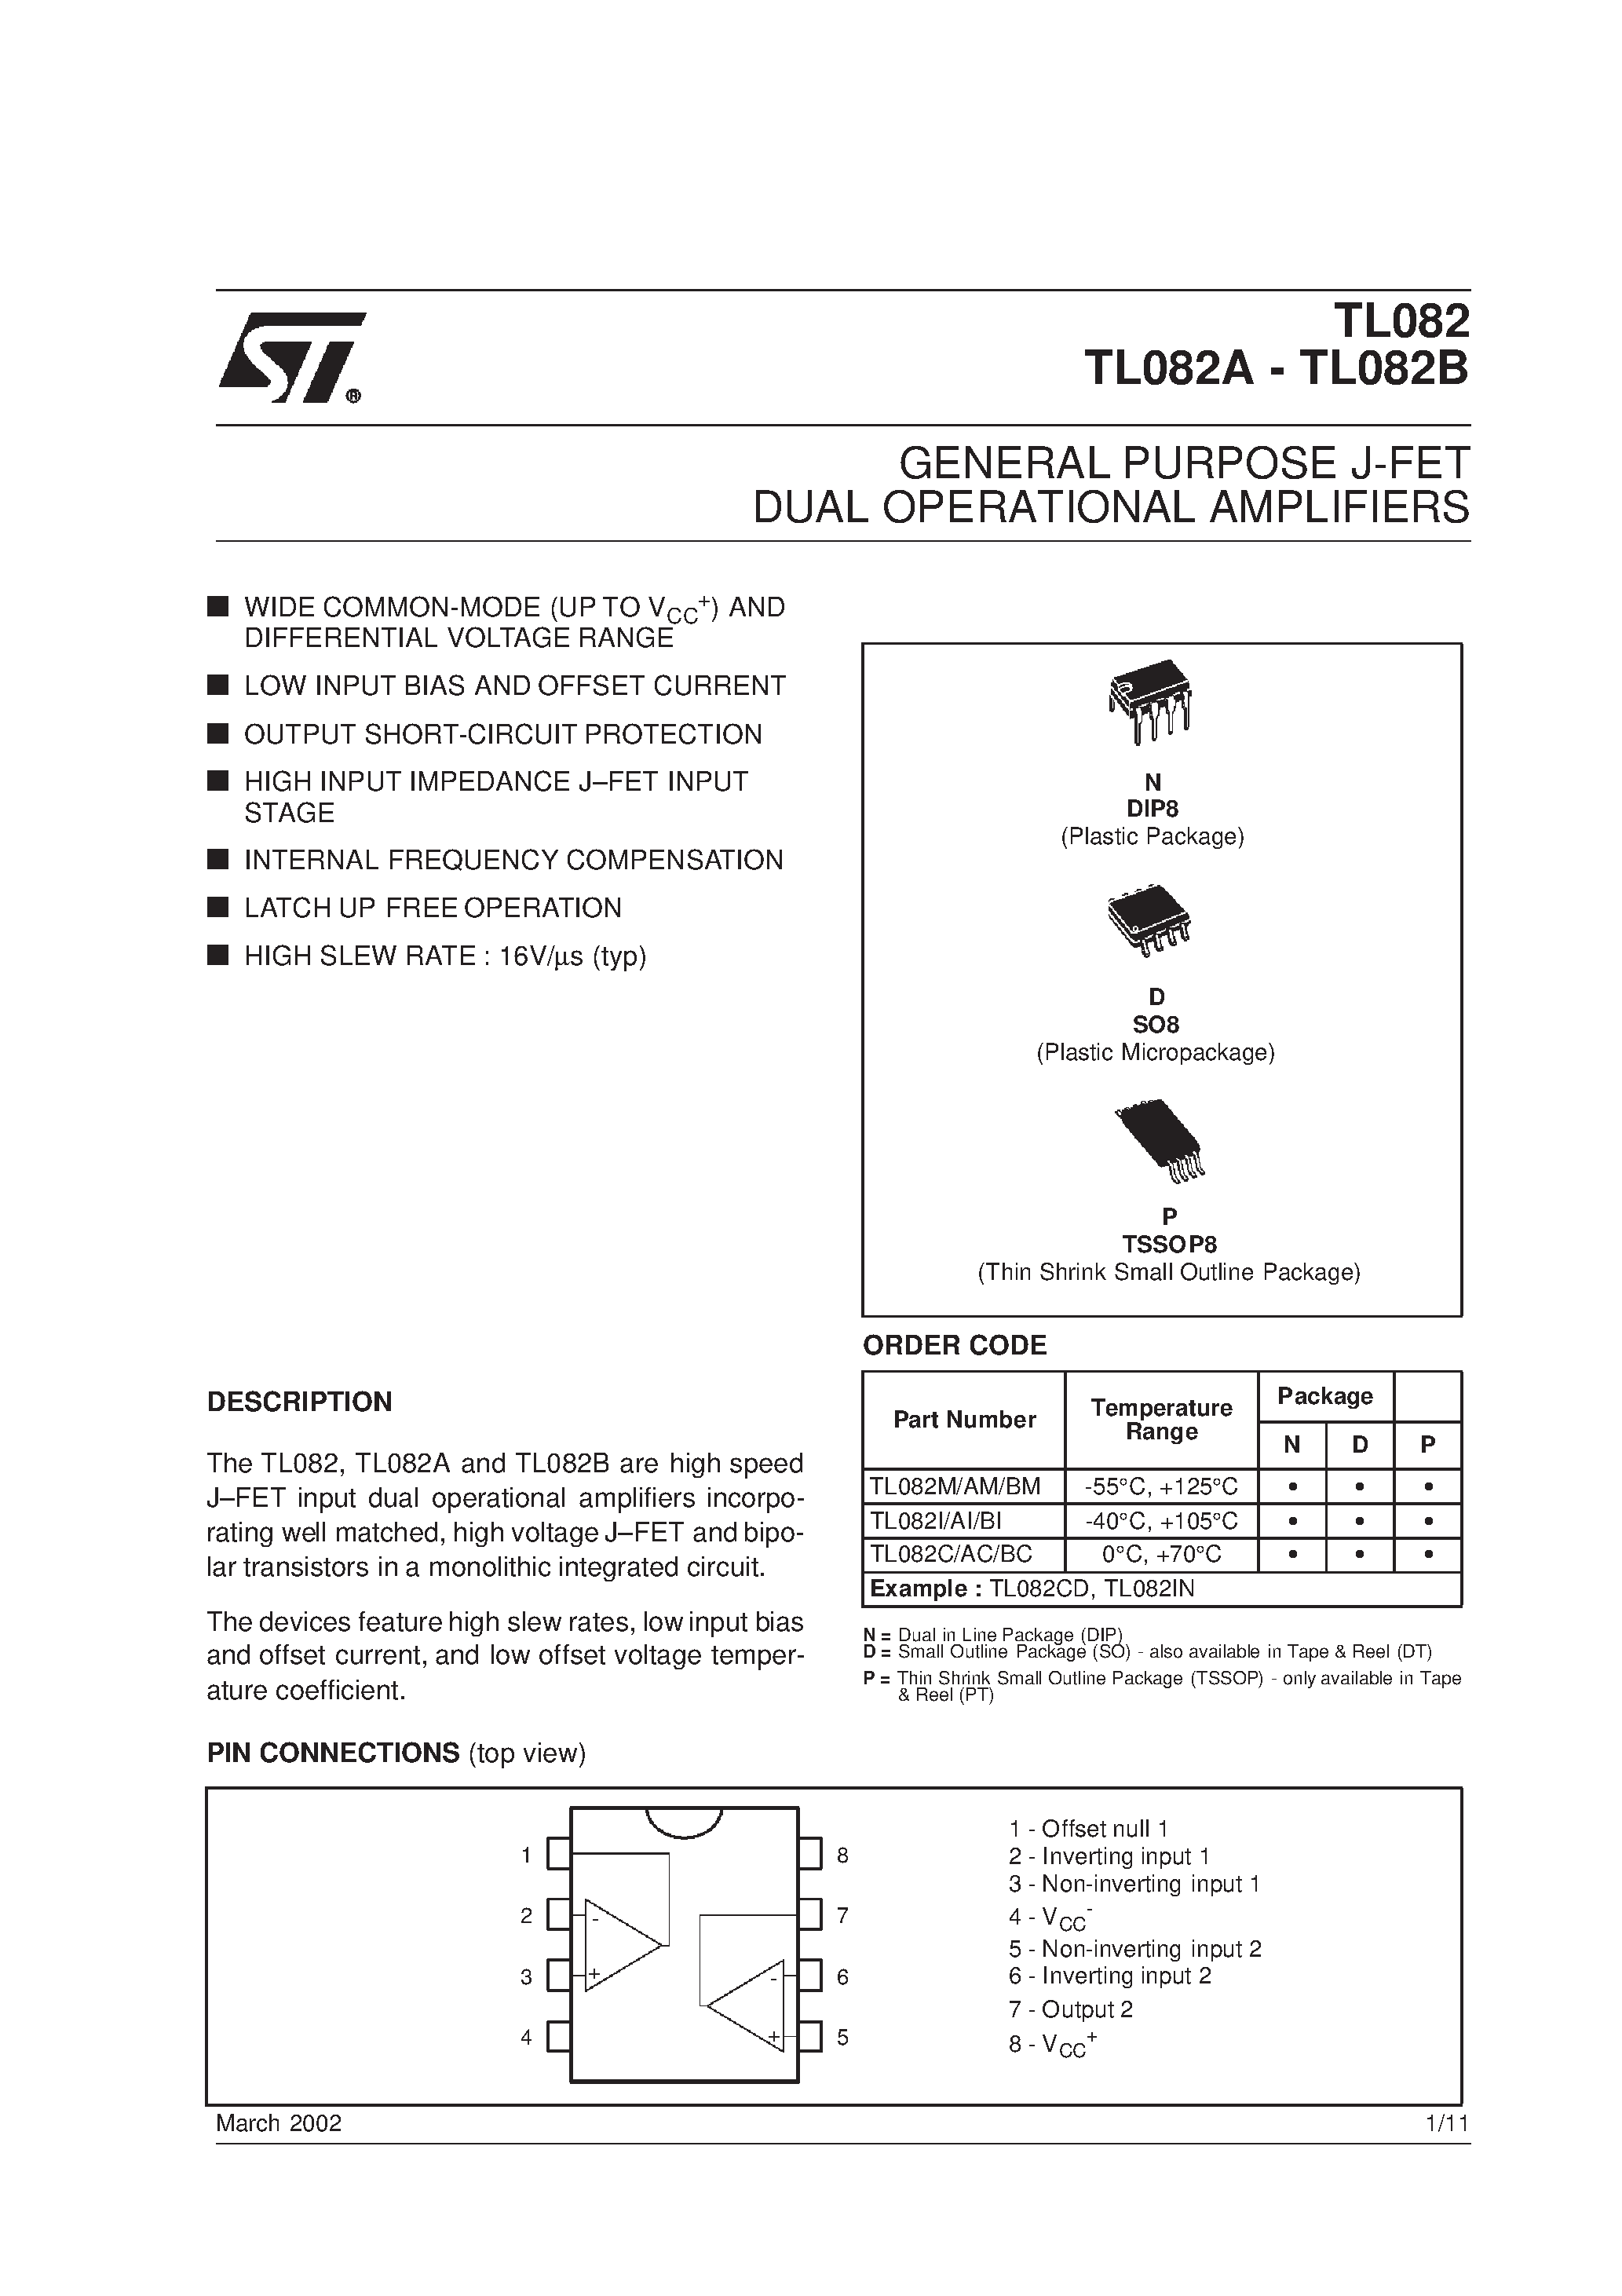 Datasheet TL082IN - GENERAL PURPOSE J-FET DUAL OPERATIONAL AMPLIFIERS page 1